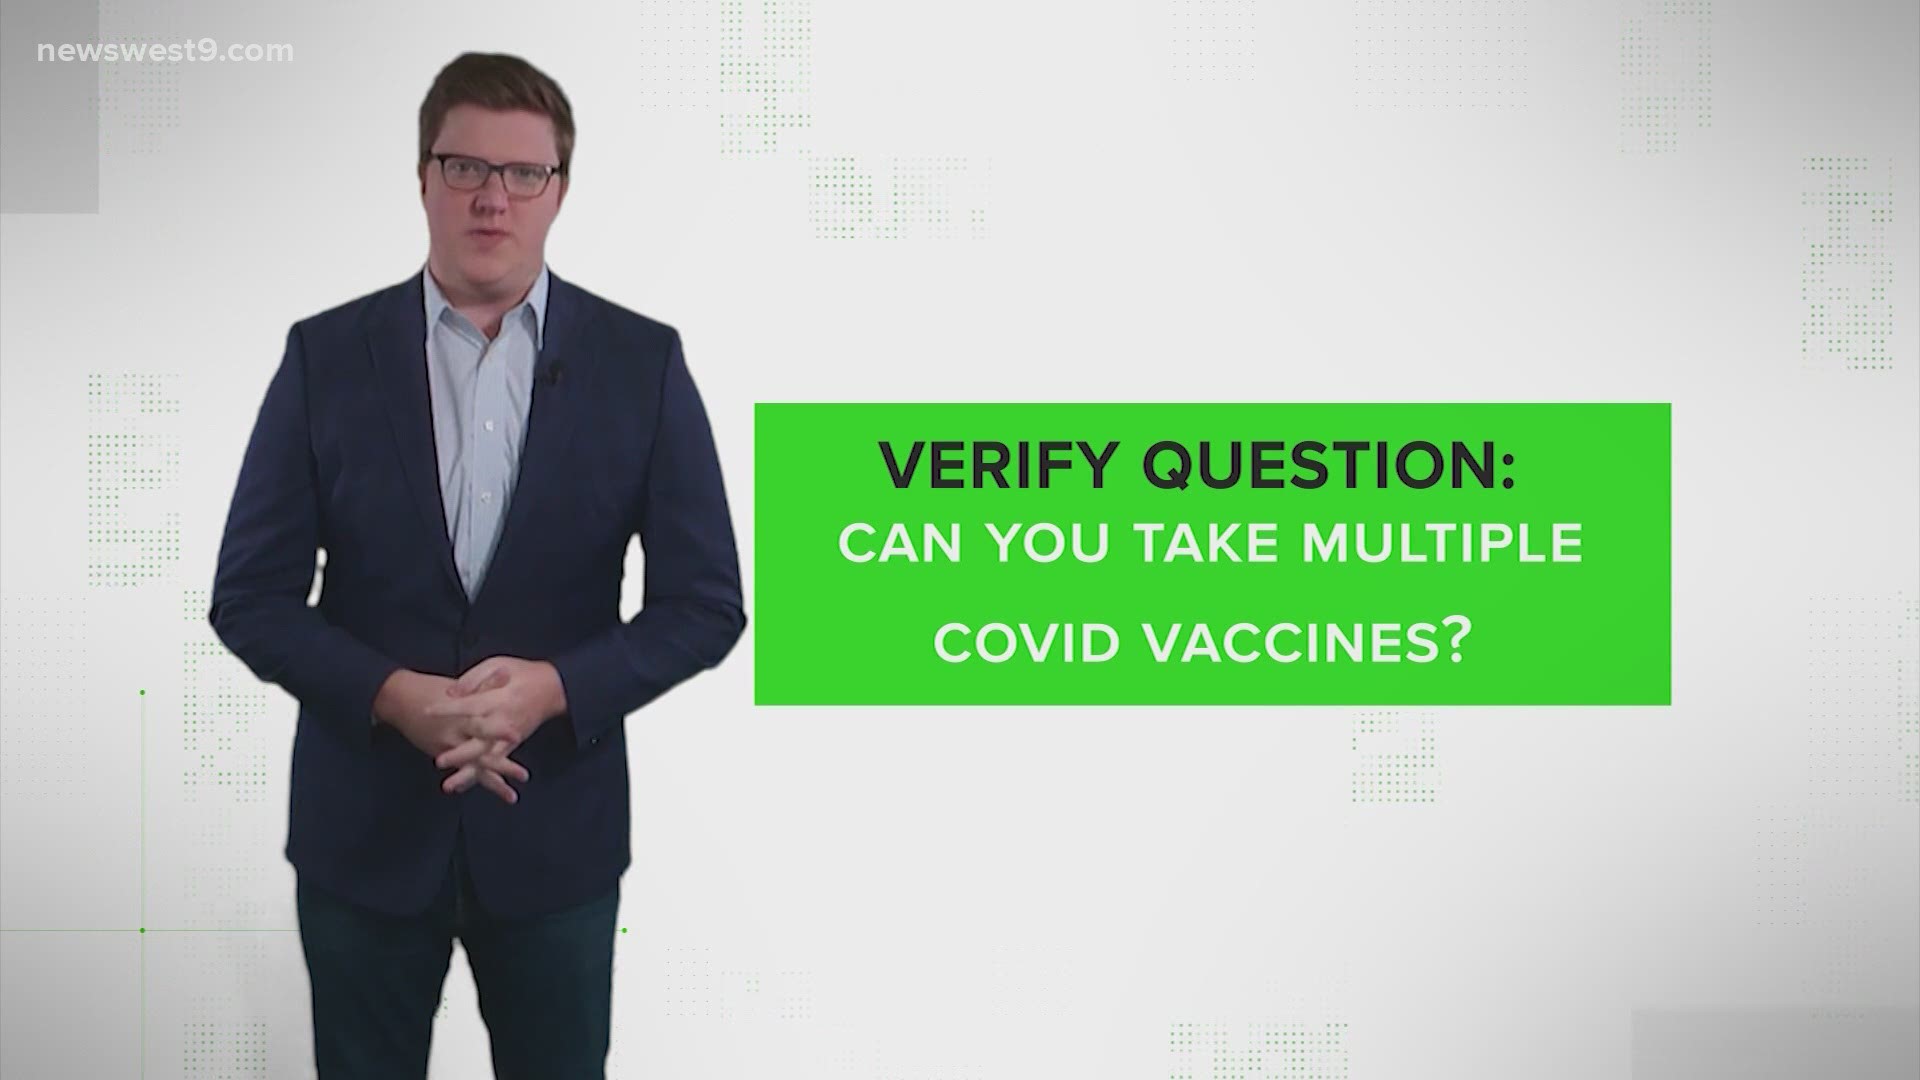 Experts say there likely won't even be enough vaccines to be able to take multiple doses.